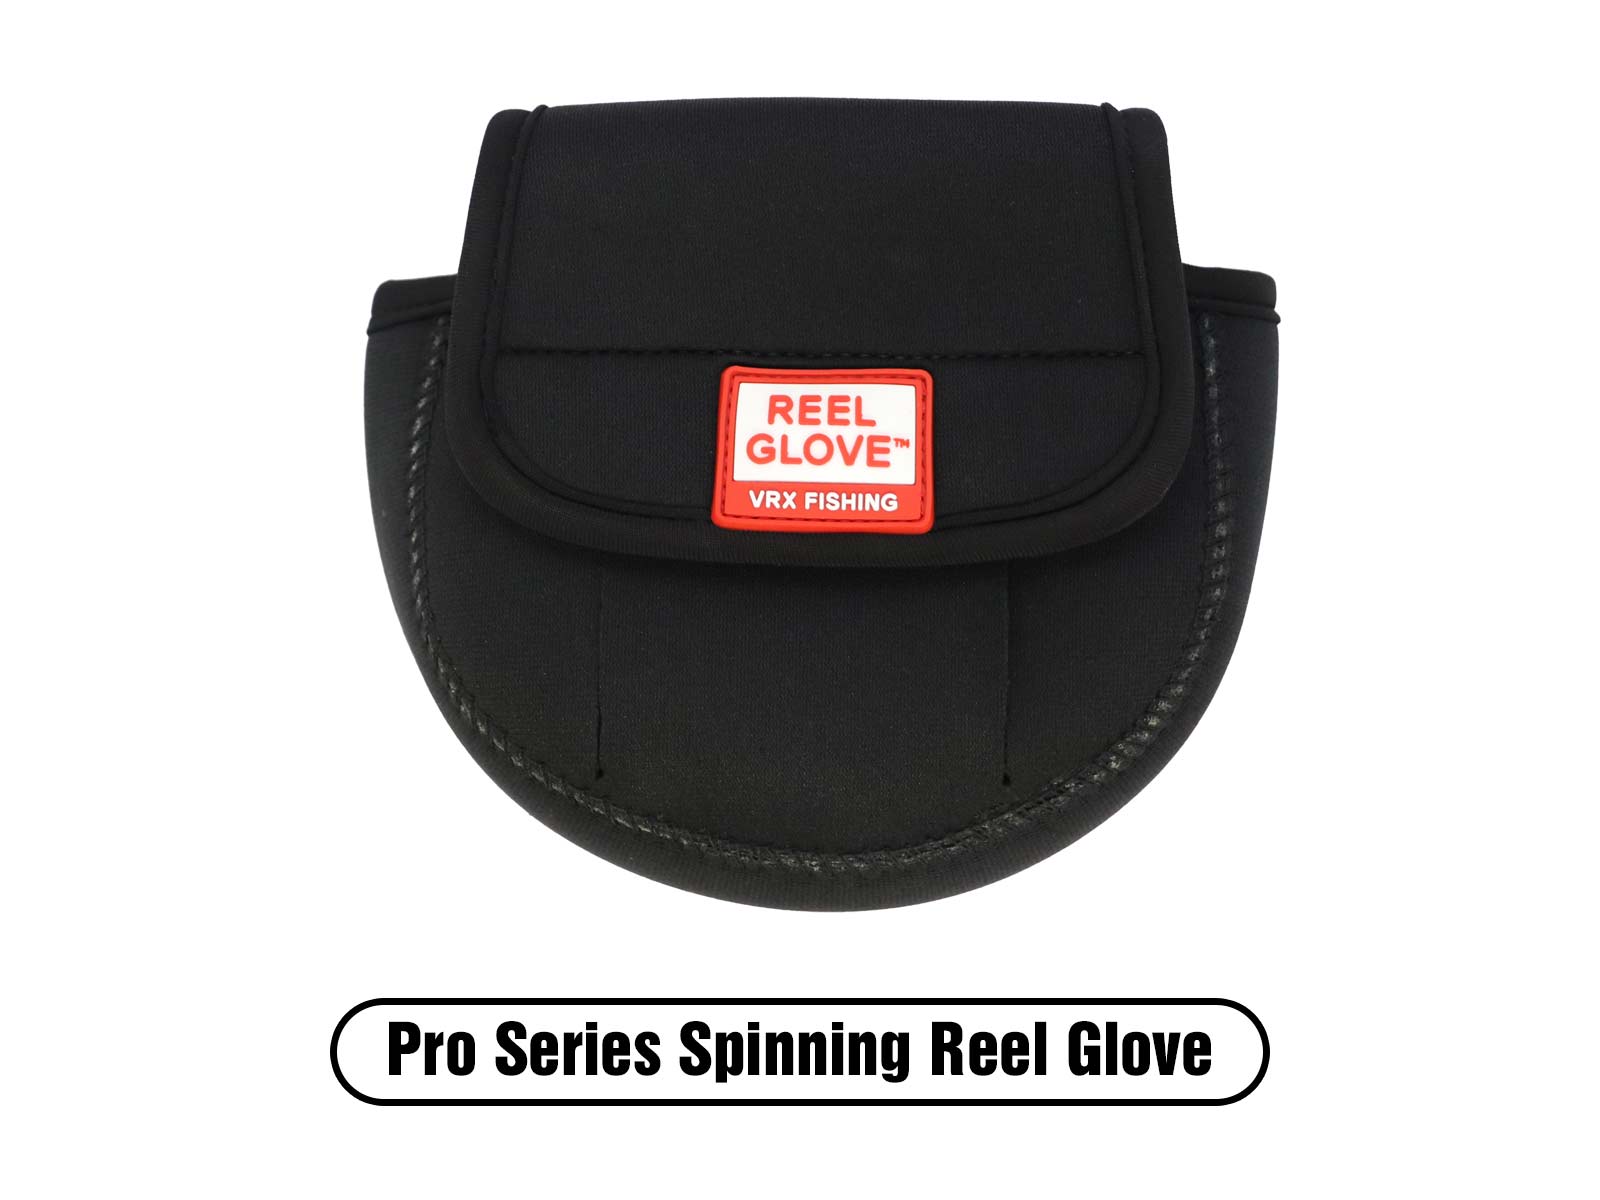 http://therodglove.ca/cdn/shop/products/Reel-Glove-Pro-Series-Spinning-reel-glove.jpg?v=1698455164